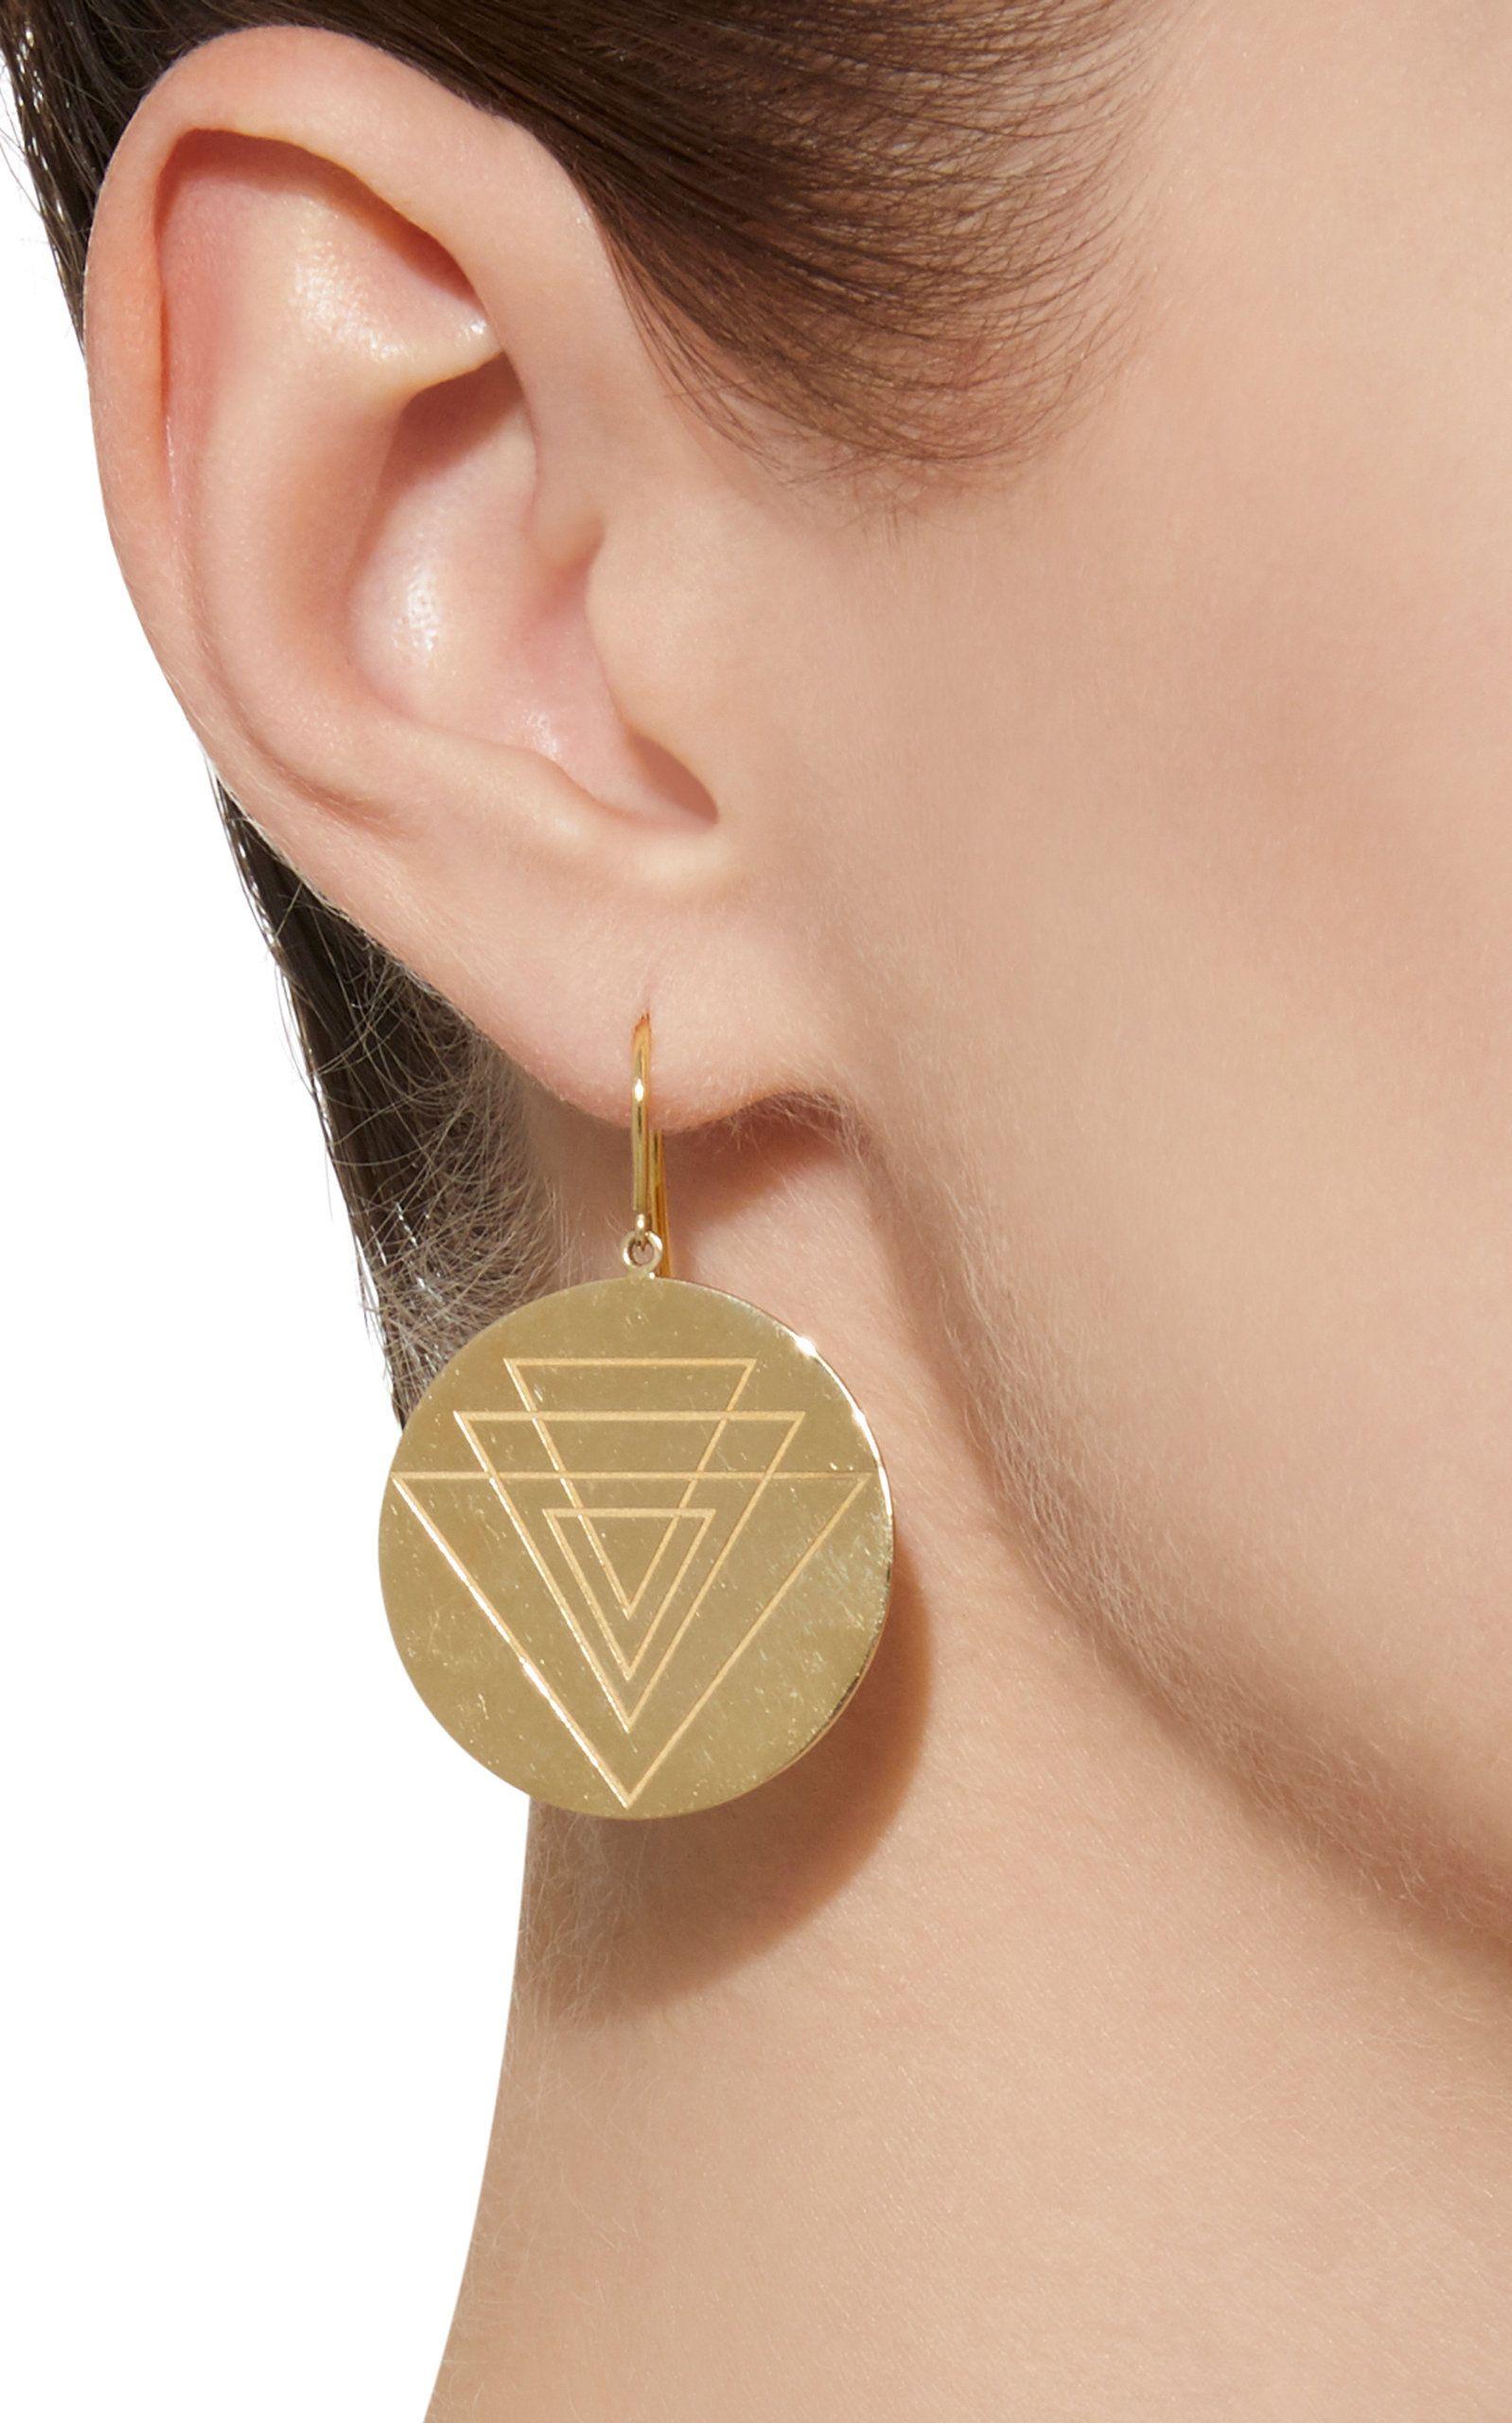 Contemporary Gold Hammered Disc Earrings with Engravings from ARK Fine Jewlelry For Sale